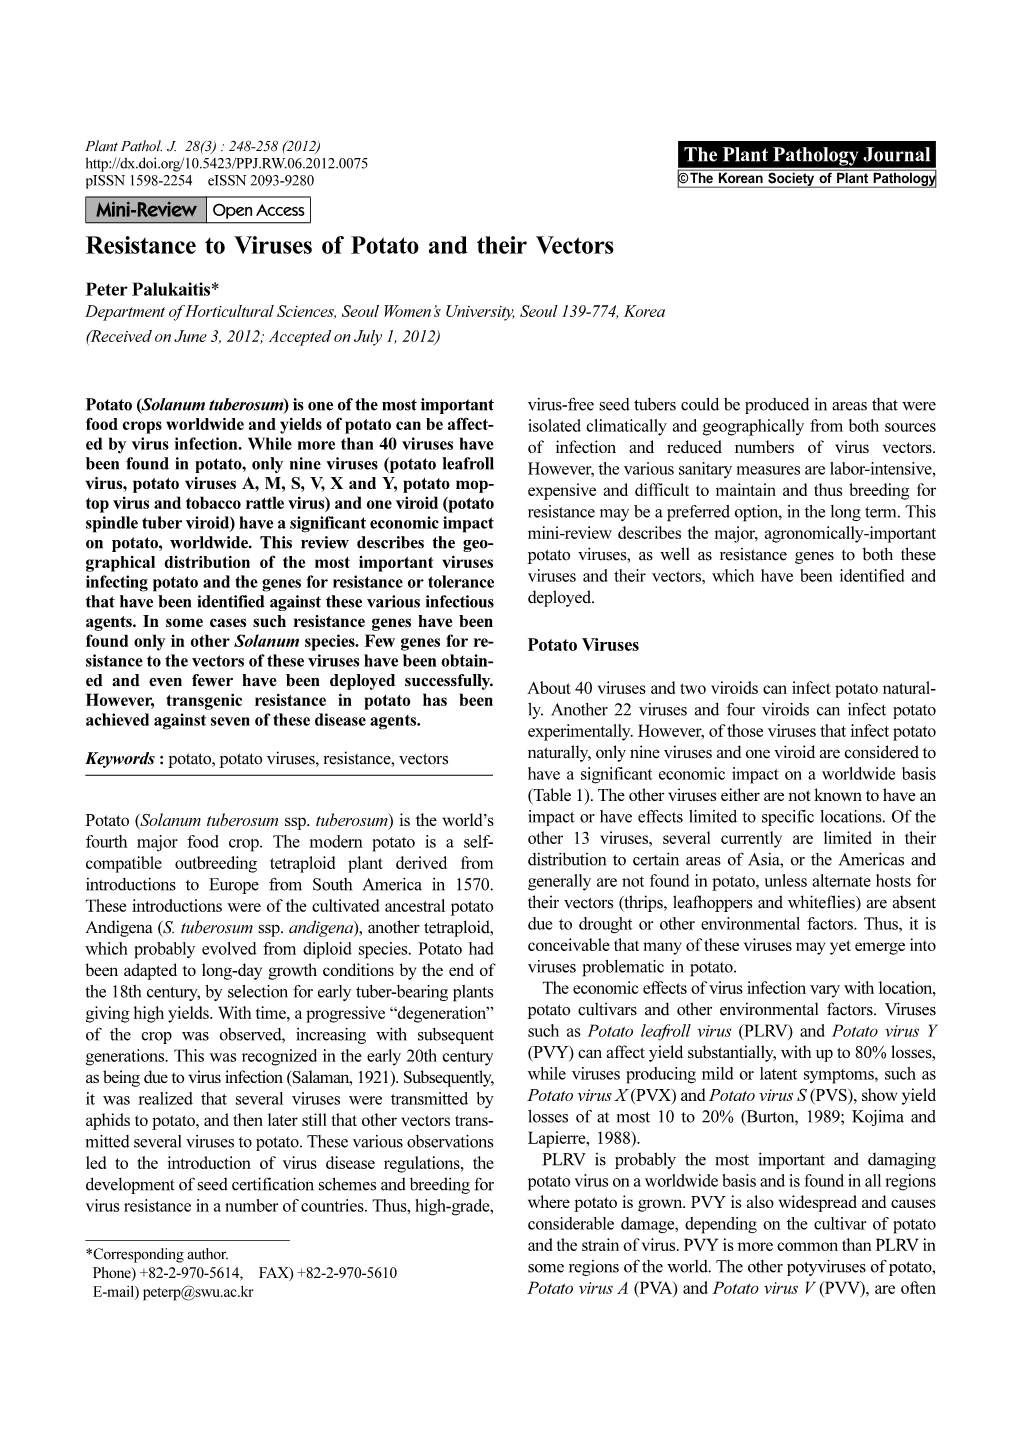 Resistance to Viruses of Potato and Their Vectors